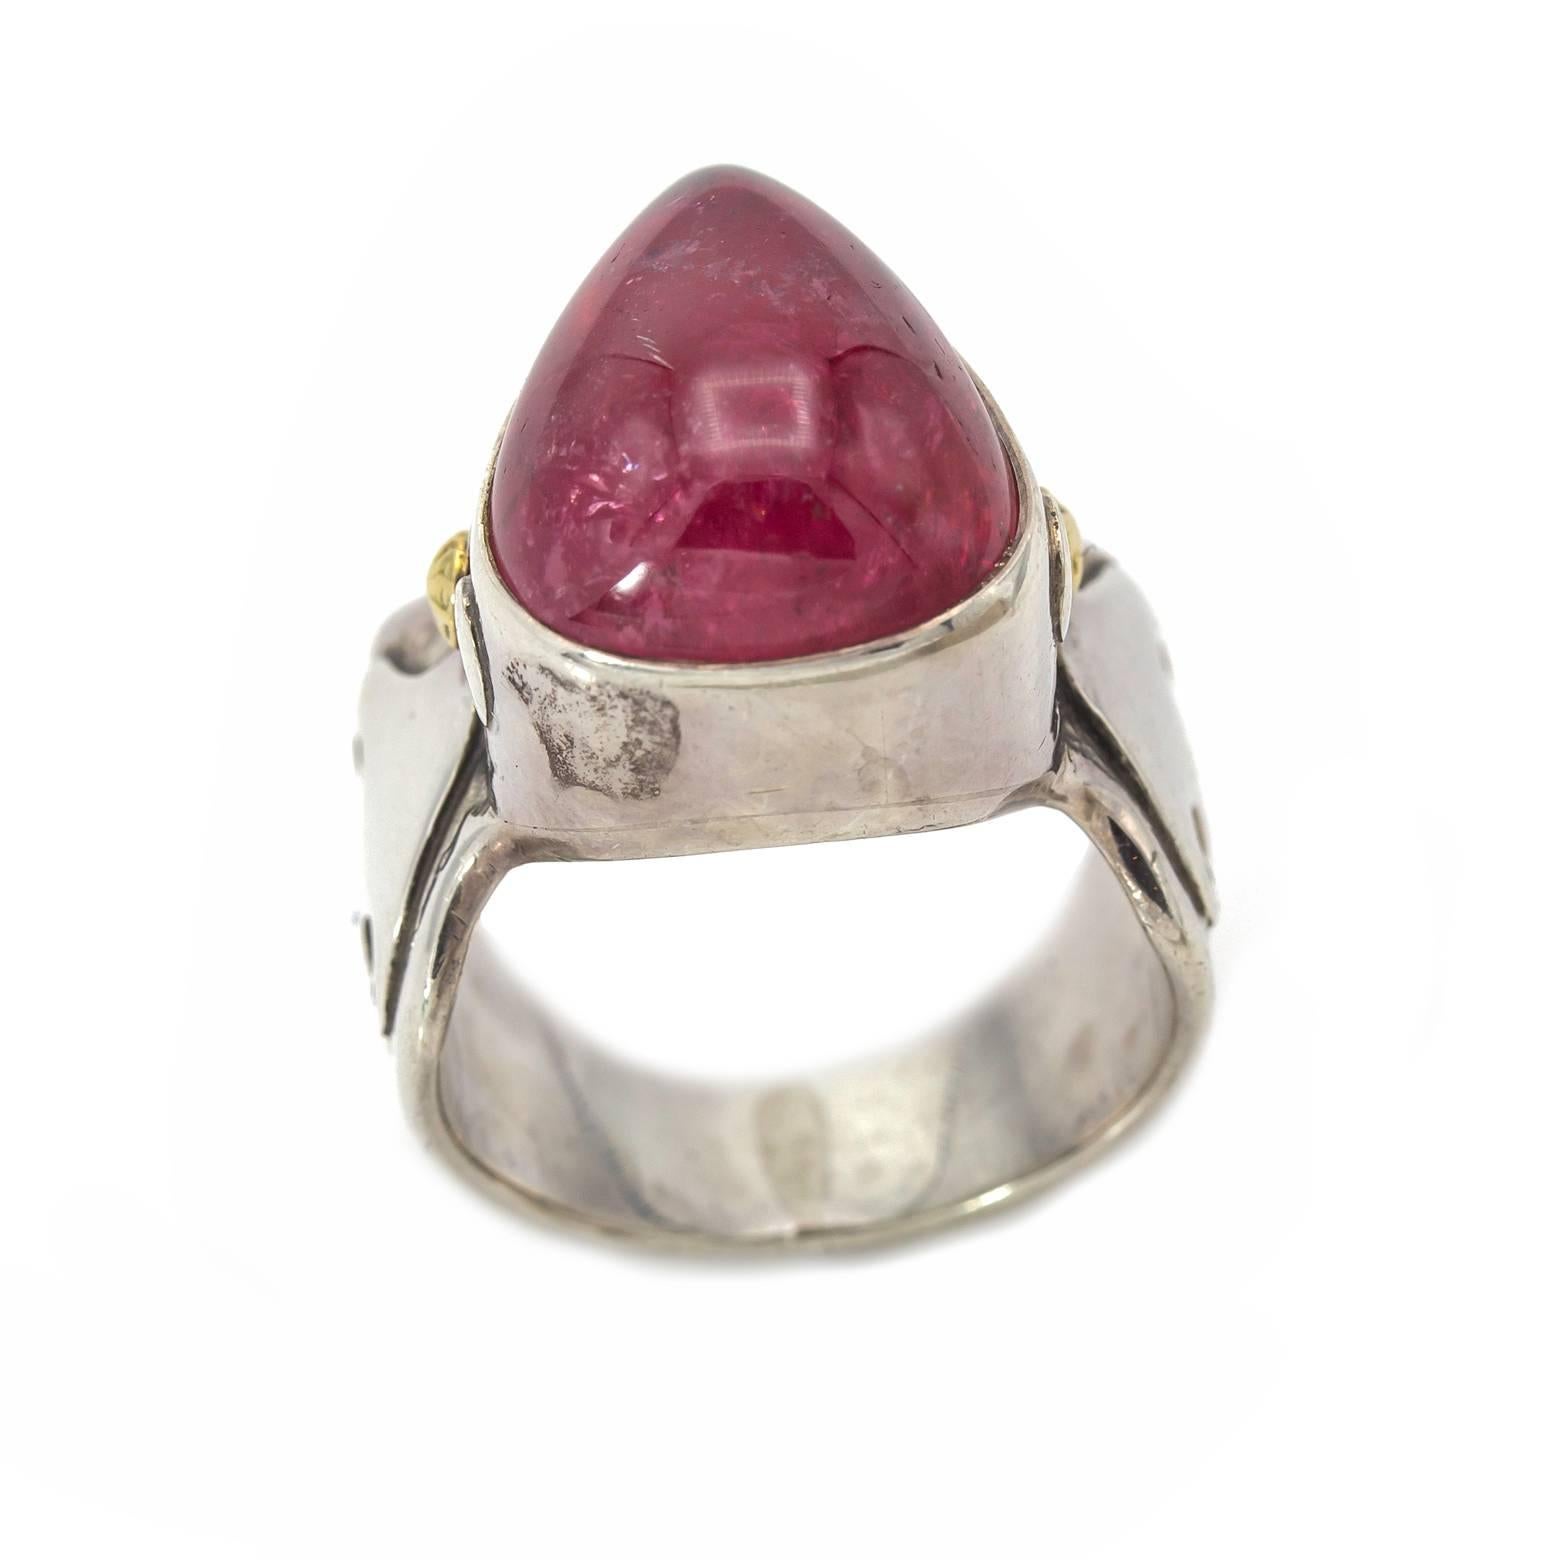 This large raspberry/watermelon pink tourmaline ring is substantial and regal! Fire-like dragon spirals add an artistic flare to the thick wide band that tapers toward the back. Sterling Silver with 18K yellow gold accents. Size 6.5